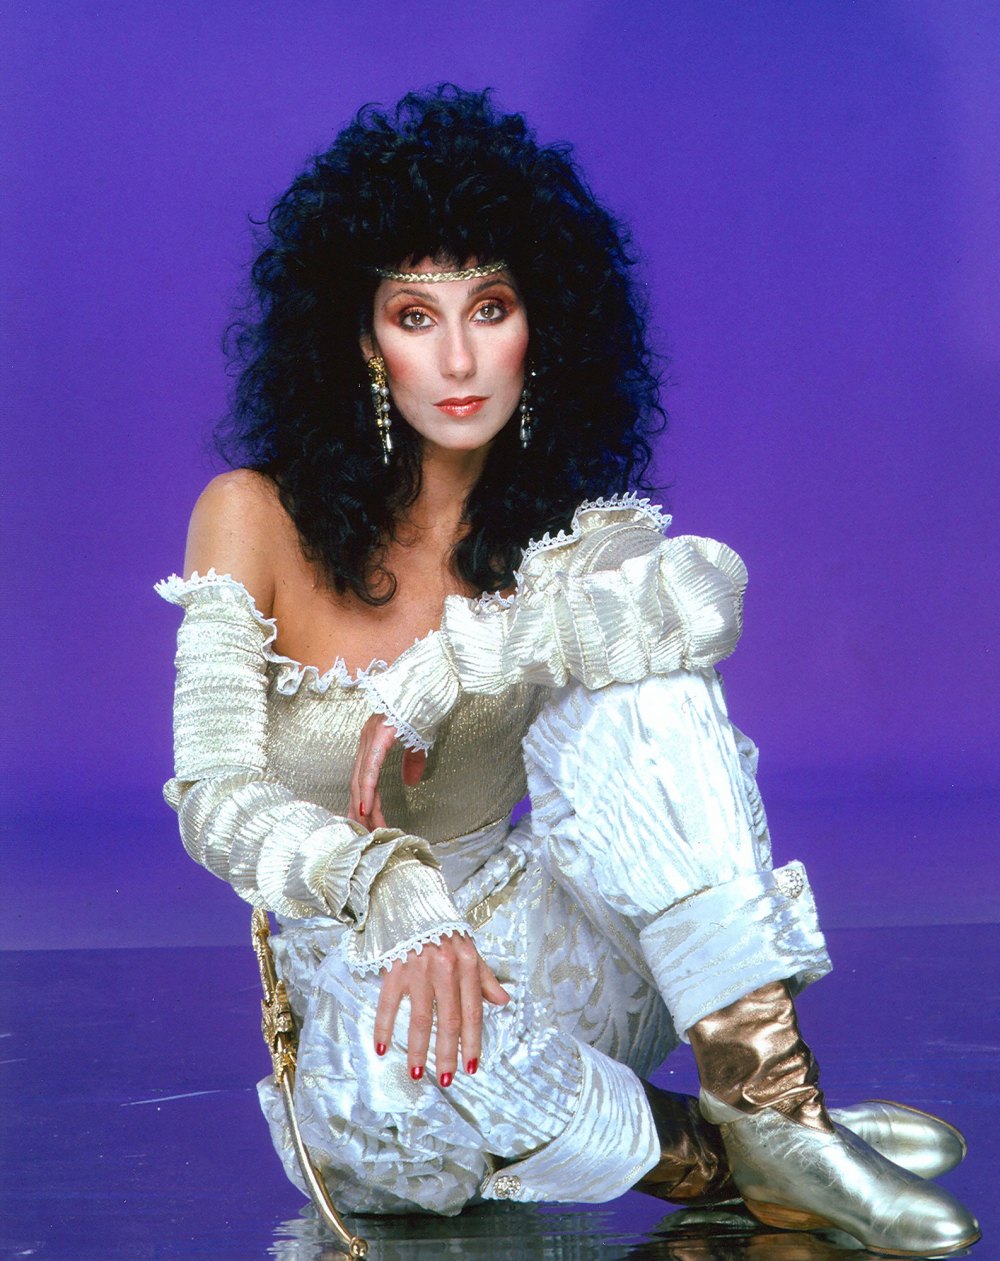 Cher Says She Chickened Out While Writing Her Memoir 2